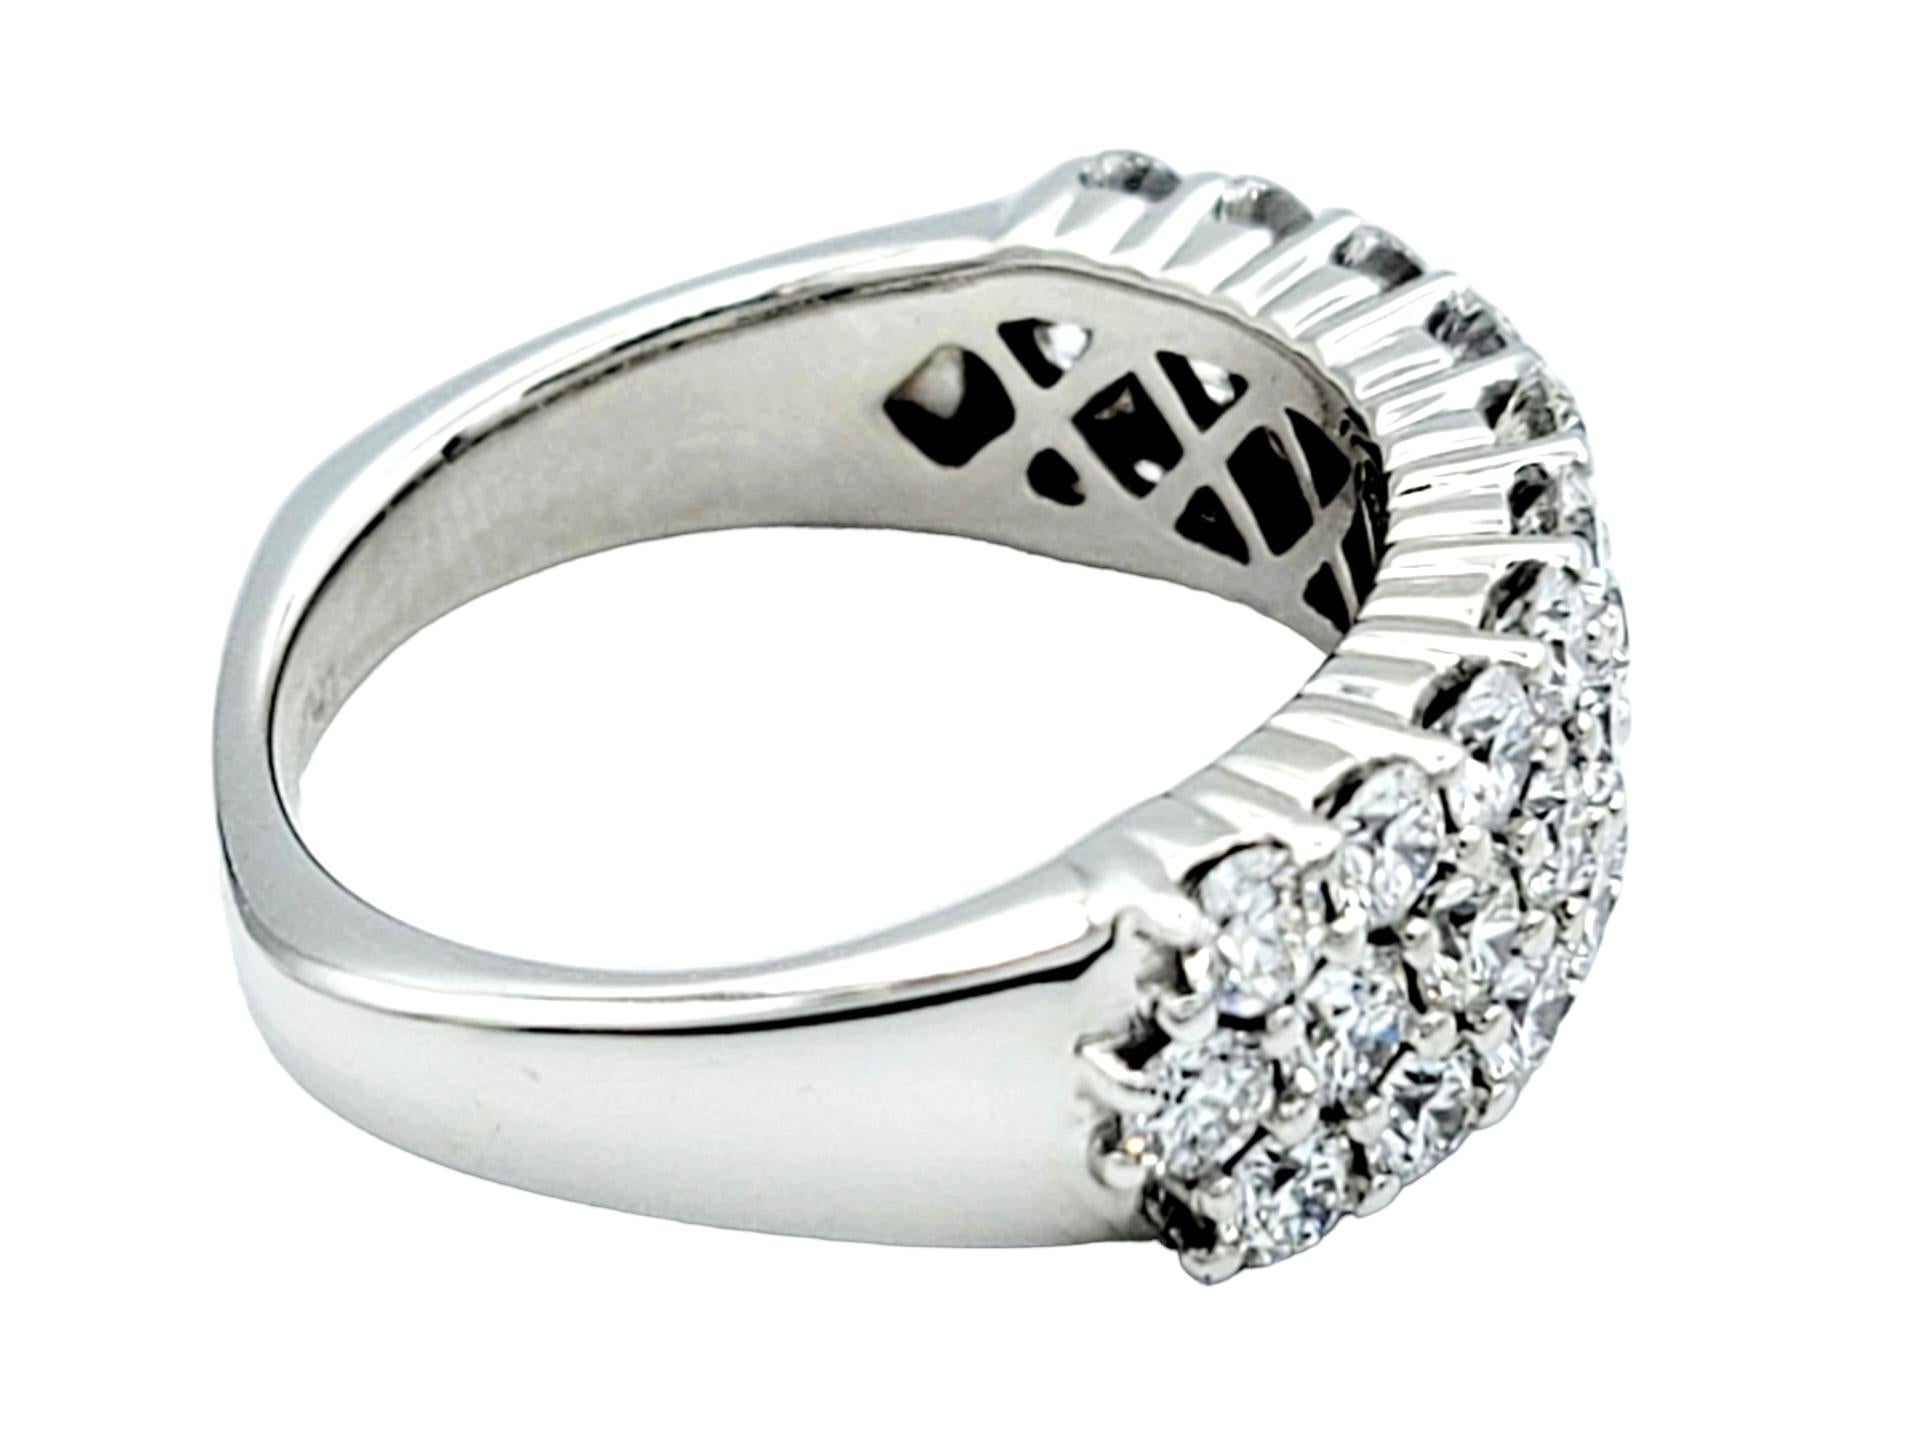 2.15 Carat Three Row Round Diamond Band Ring in Polished 18 Karat White Gold  In Good Condition For Sale In Scottsdale, AZ